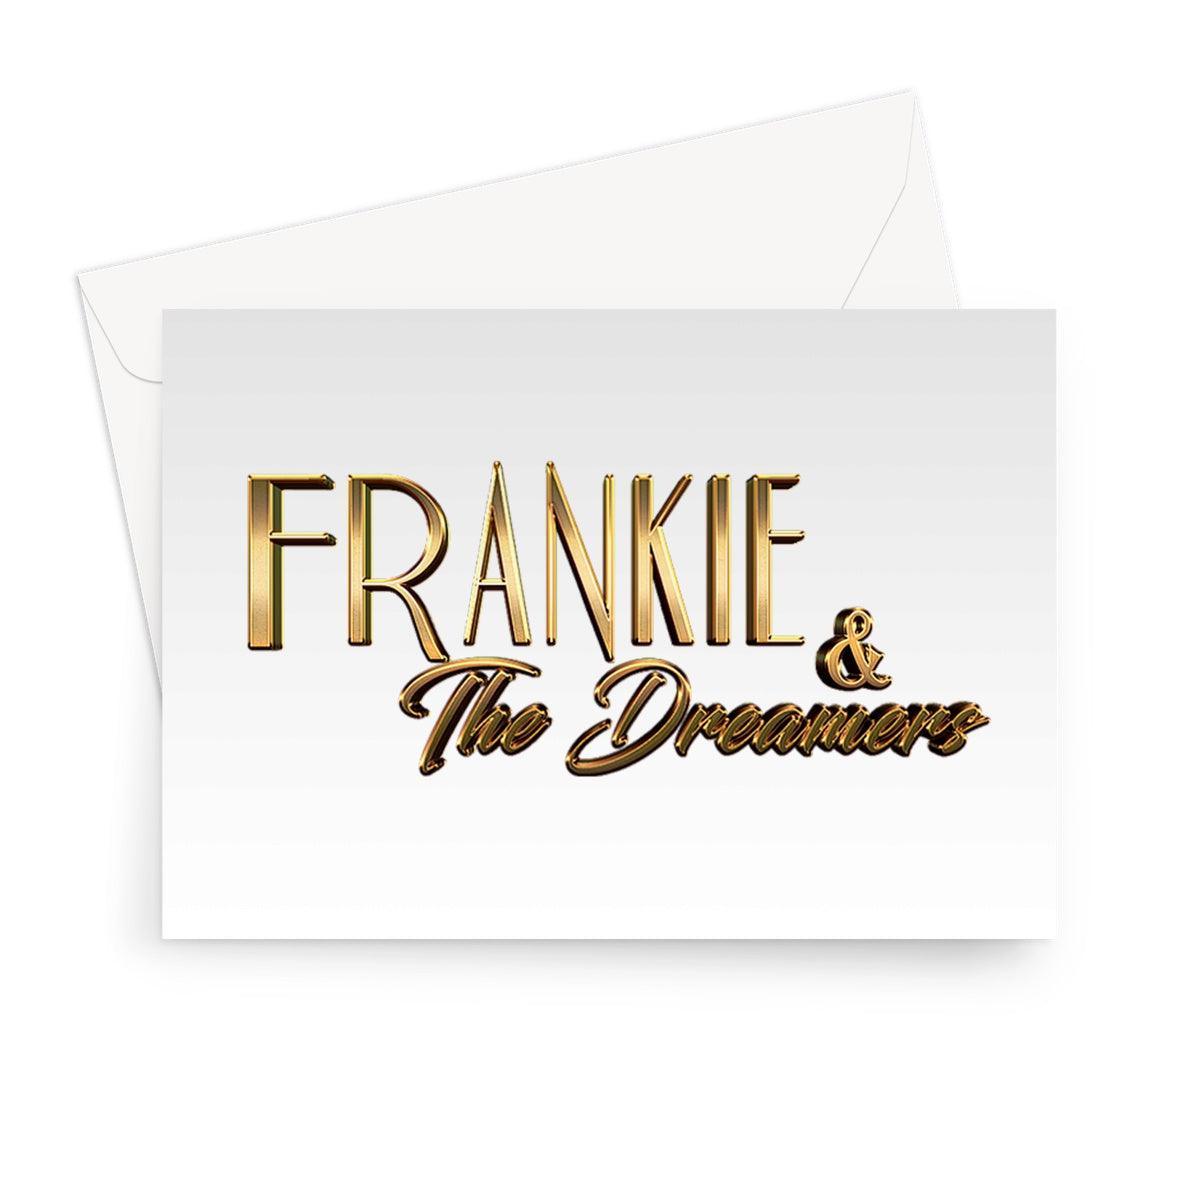 Frankie And The Dreamers Greeting Card | Stationery 7"x5" 10 Cards